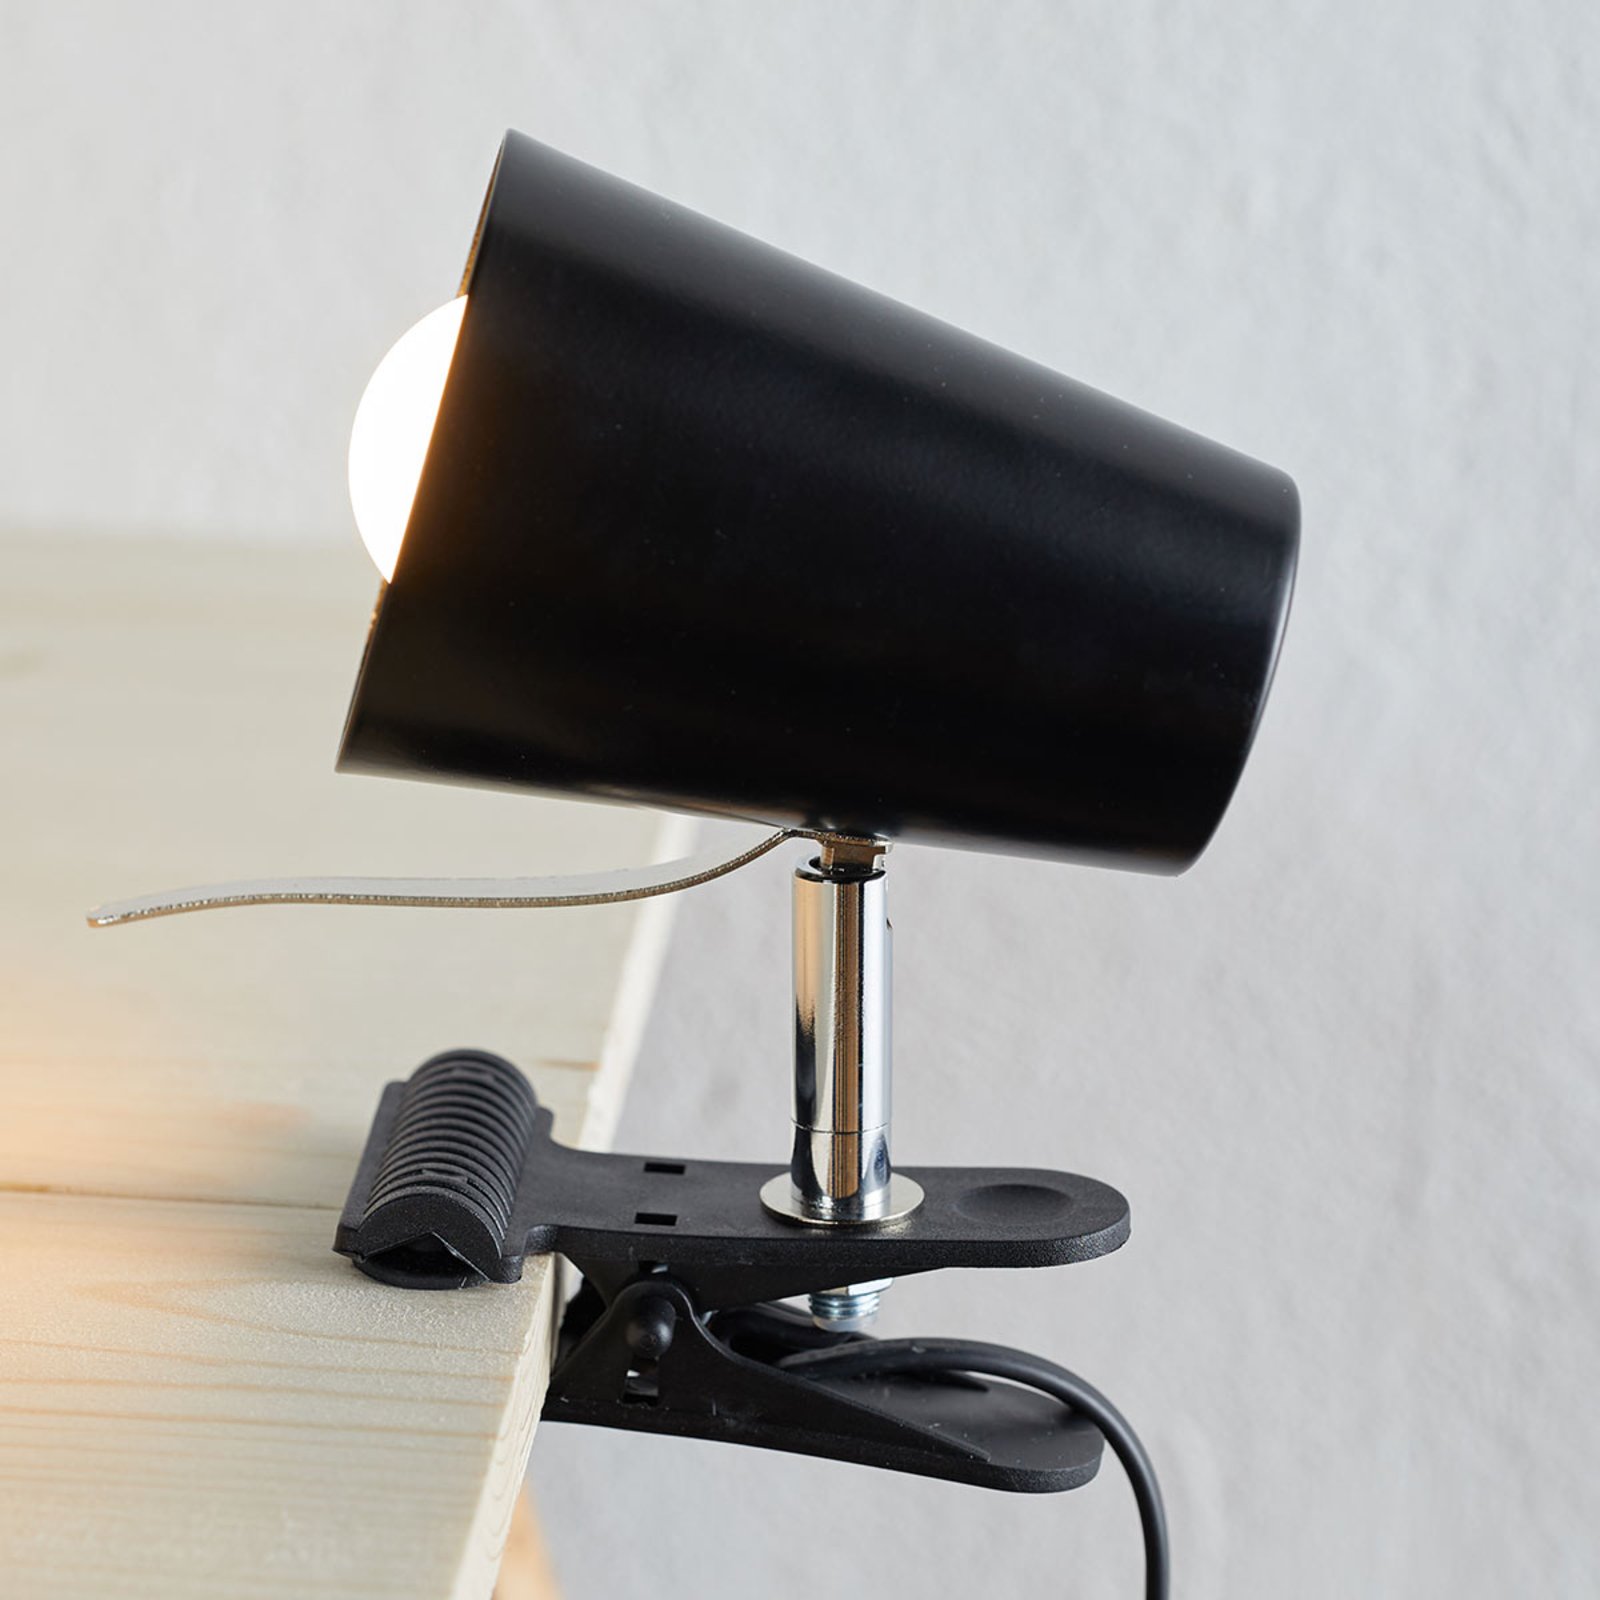 Black Clampspots clip-on light in a modern look